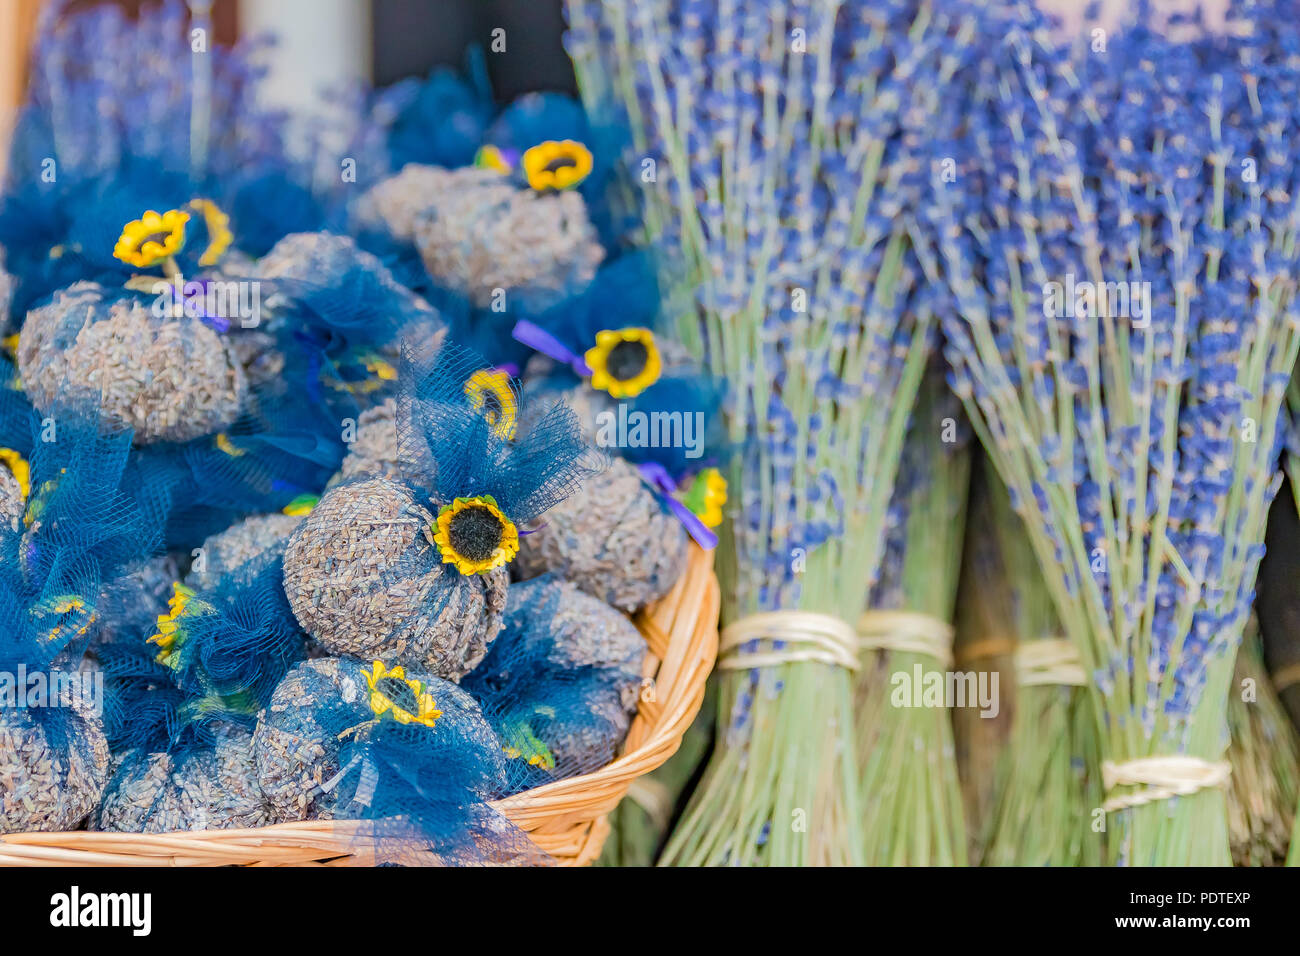 Colorful decorative sachets filled with lavender at market at a market in Nice in the South of France Stock Photo